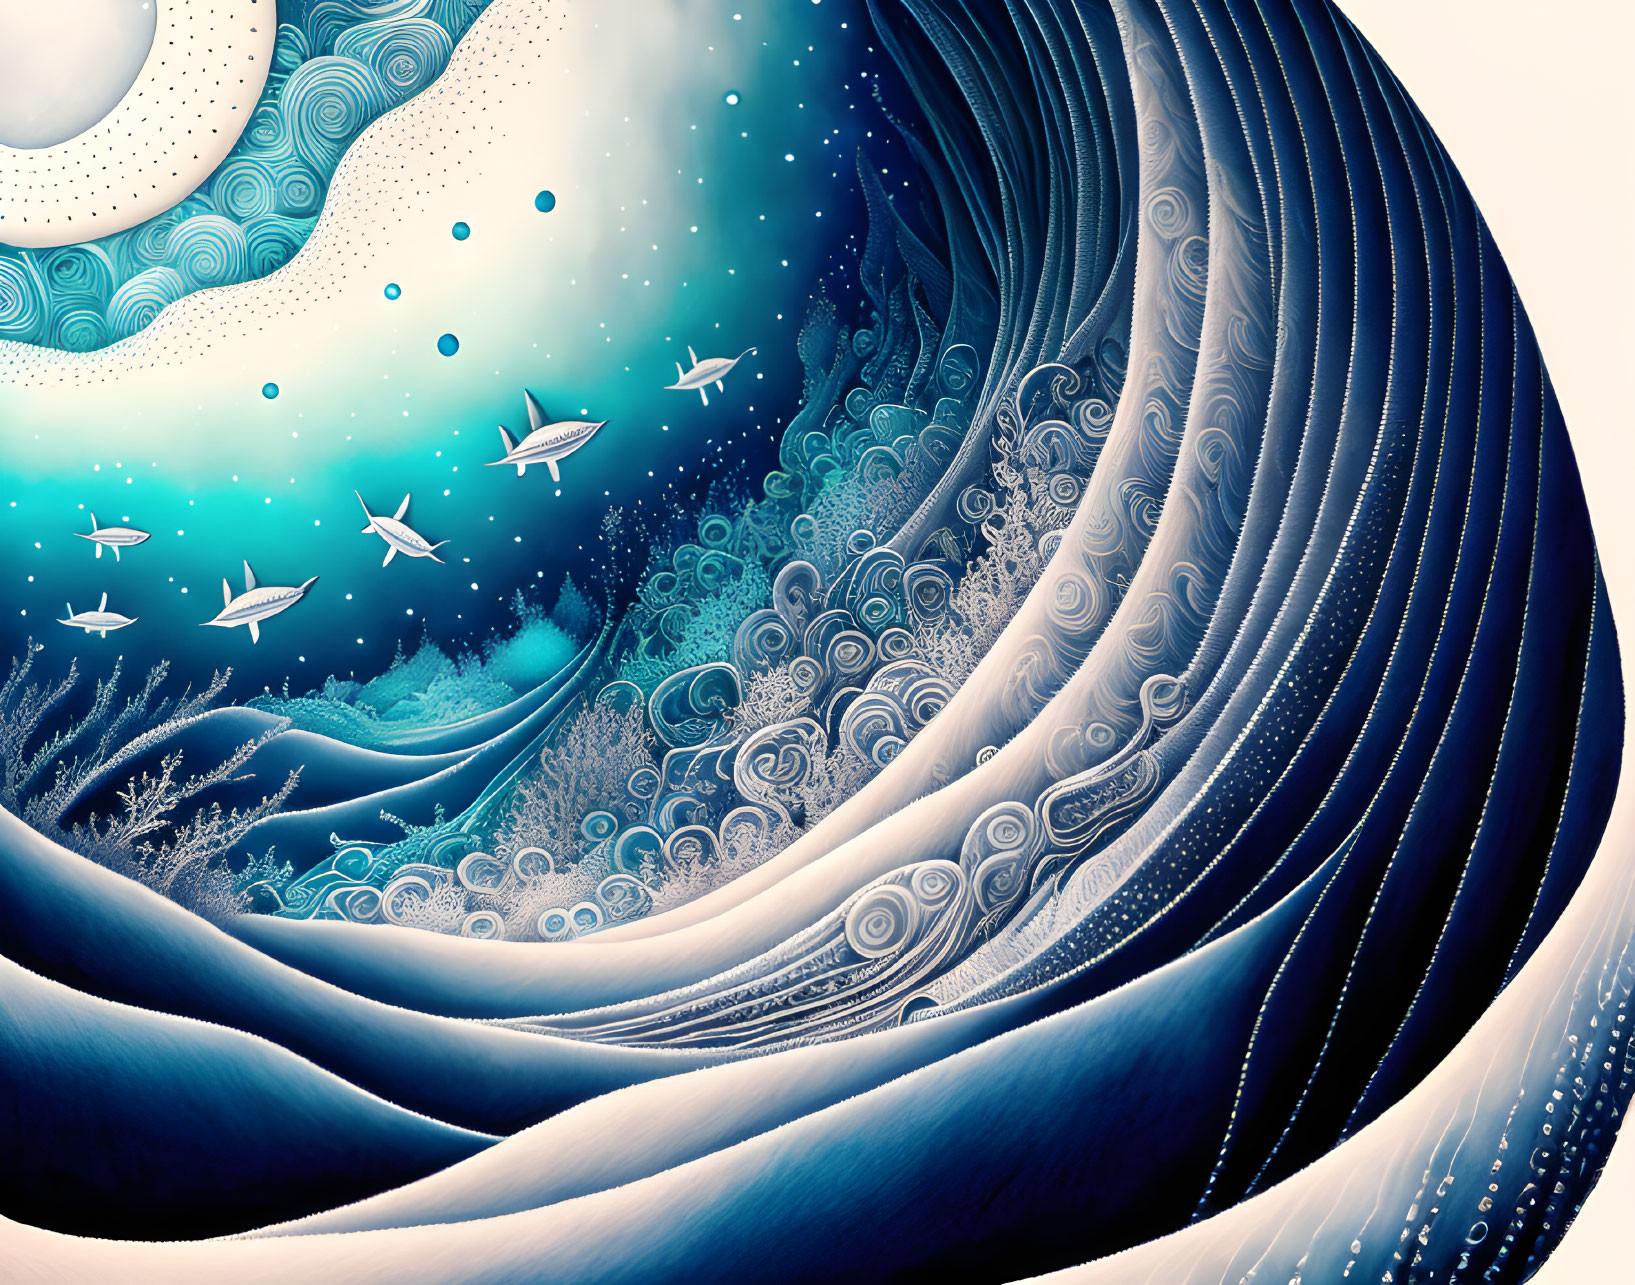 Surreal digital artwork: stylized ocean wave merging with starry sky and paper airplanes